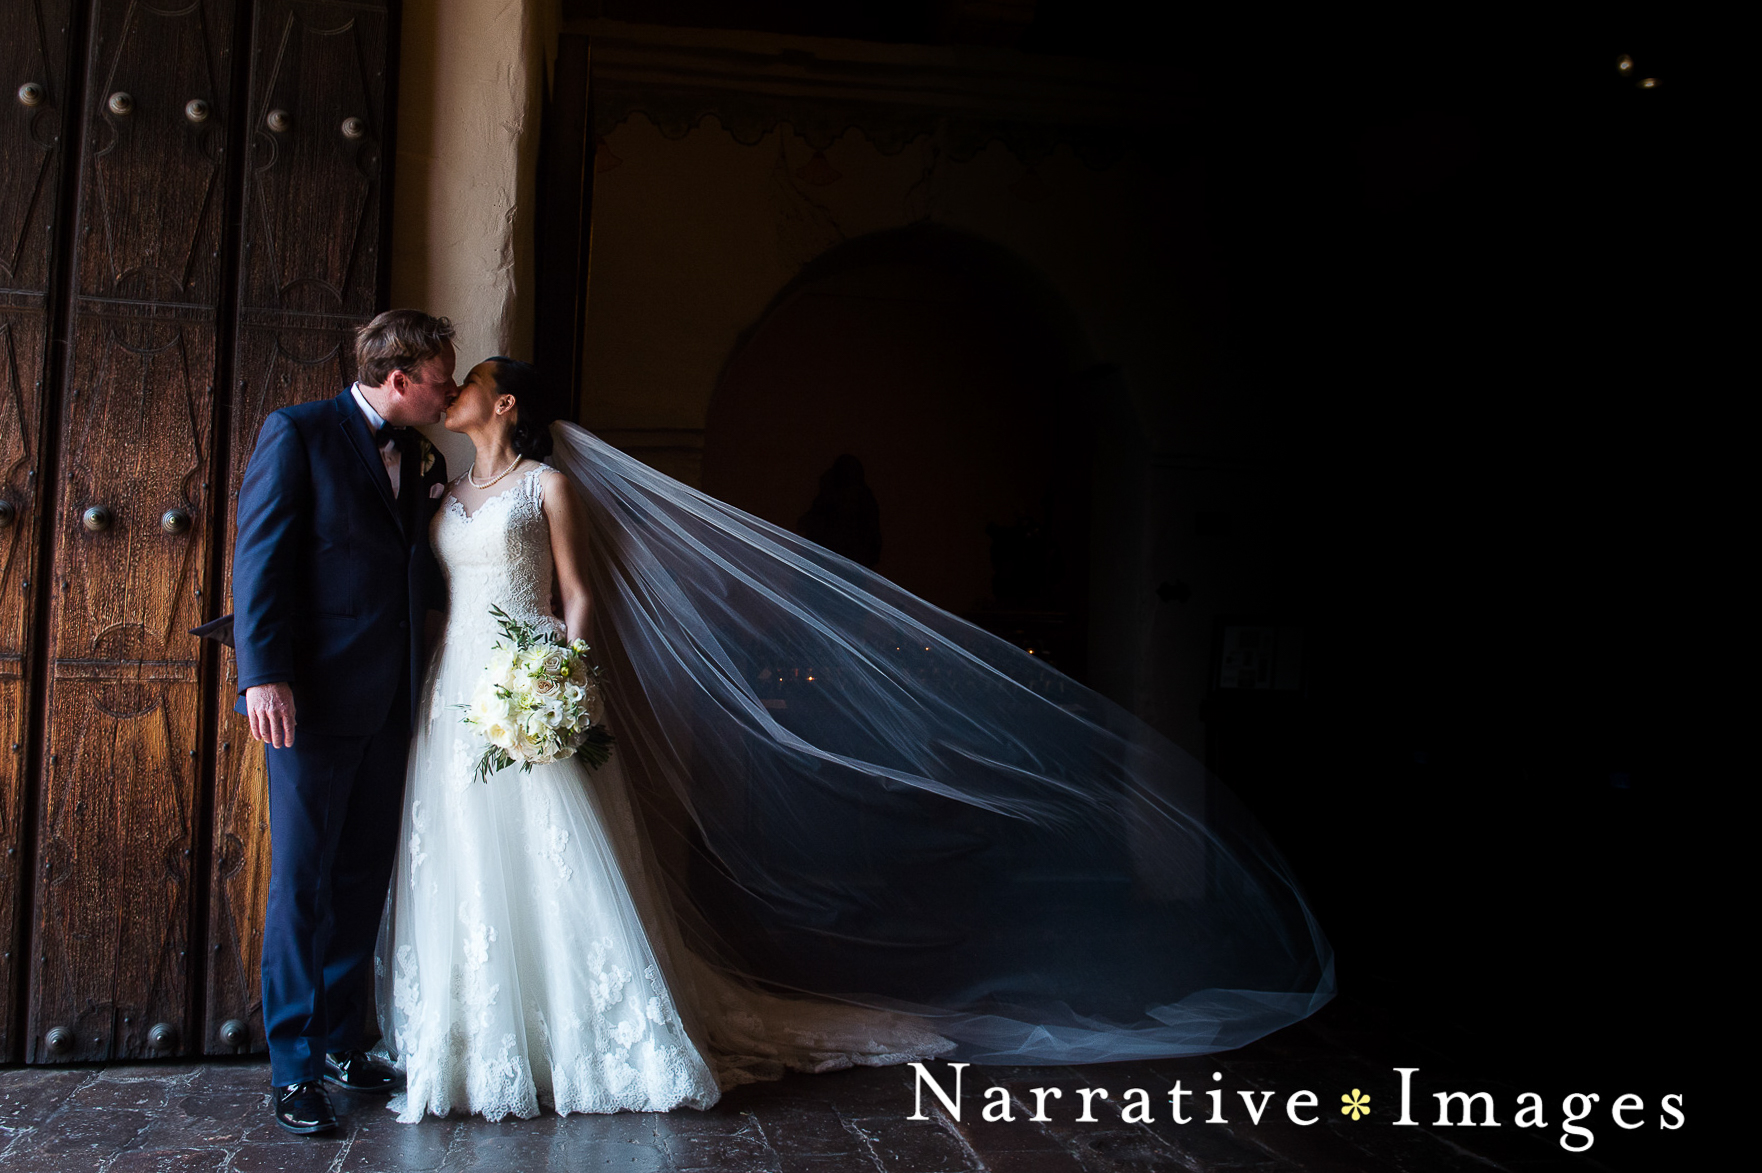 Bride and groom kiss in front of doors at Mission San Diego de Alcala